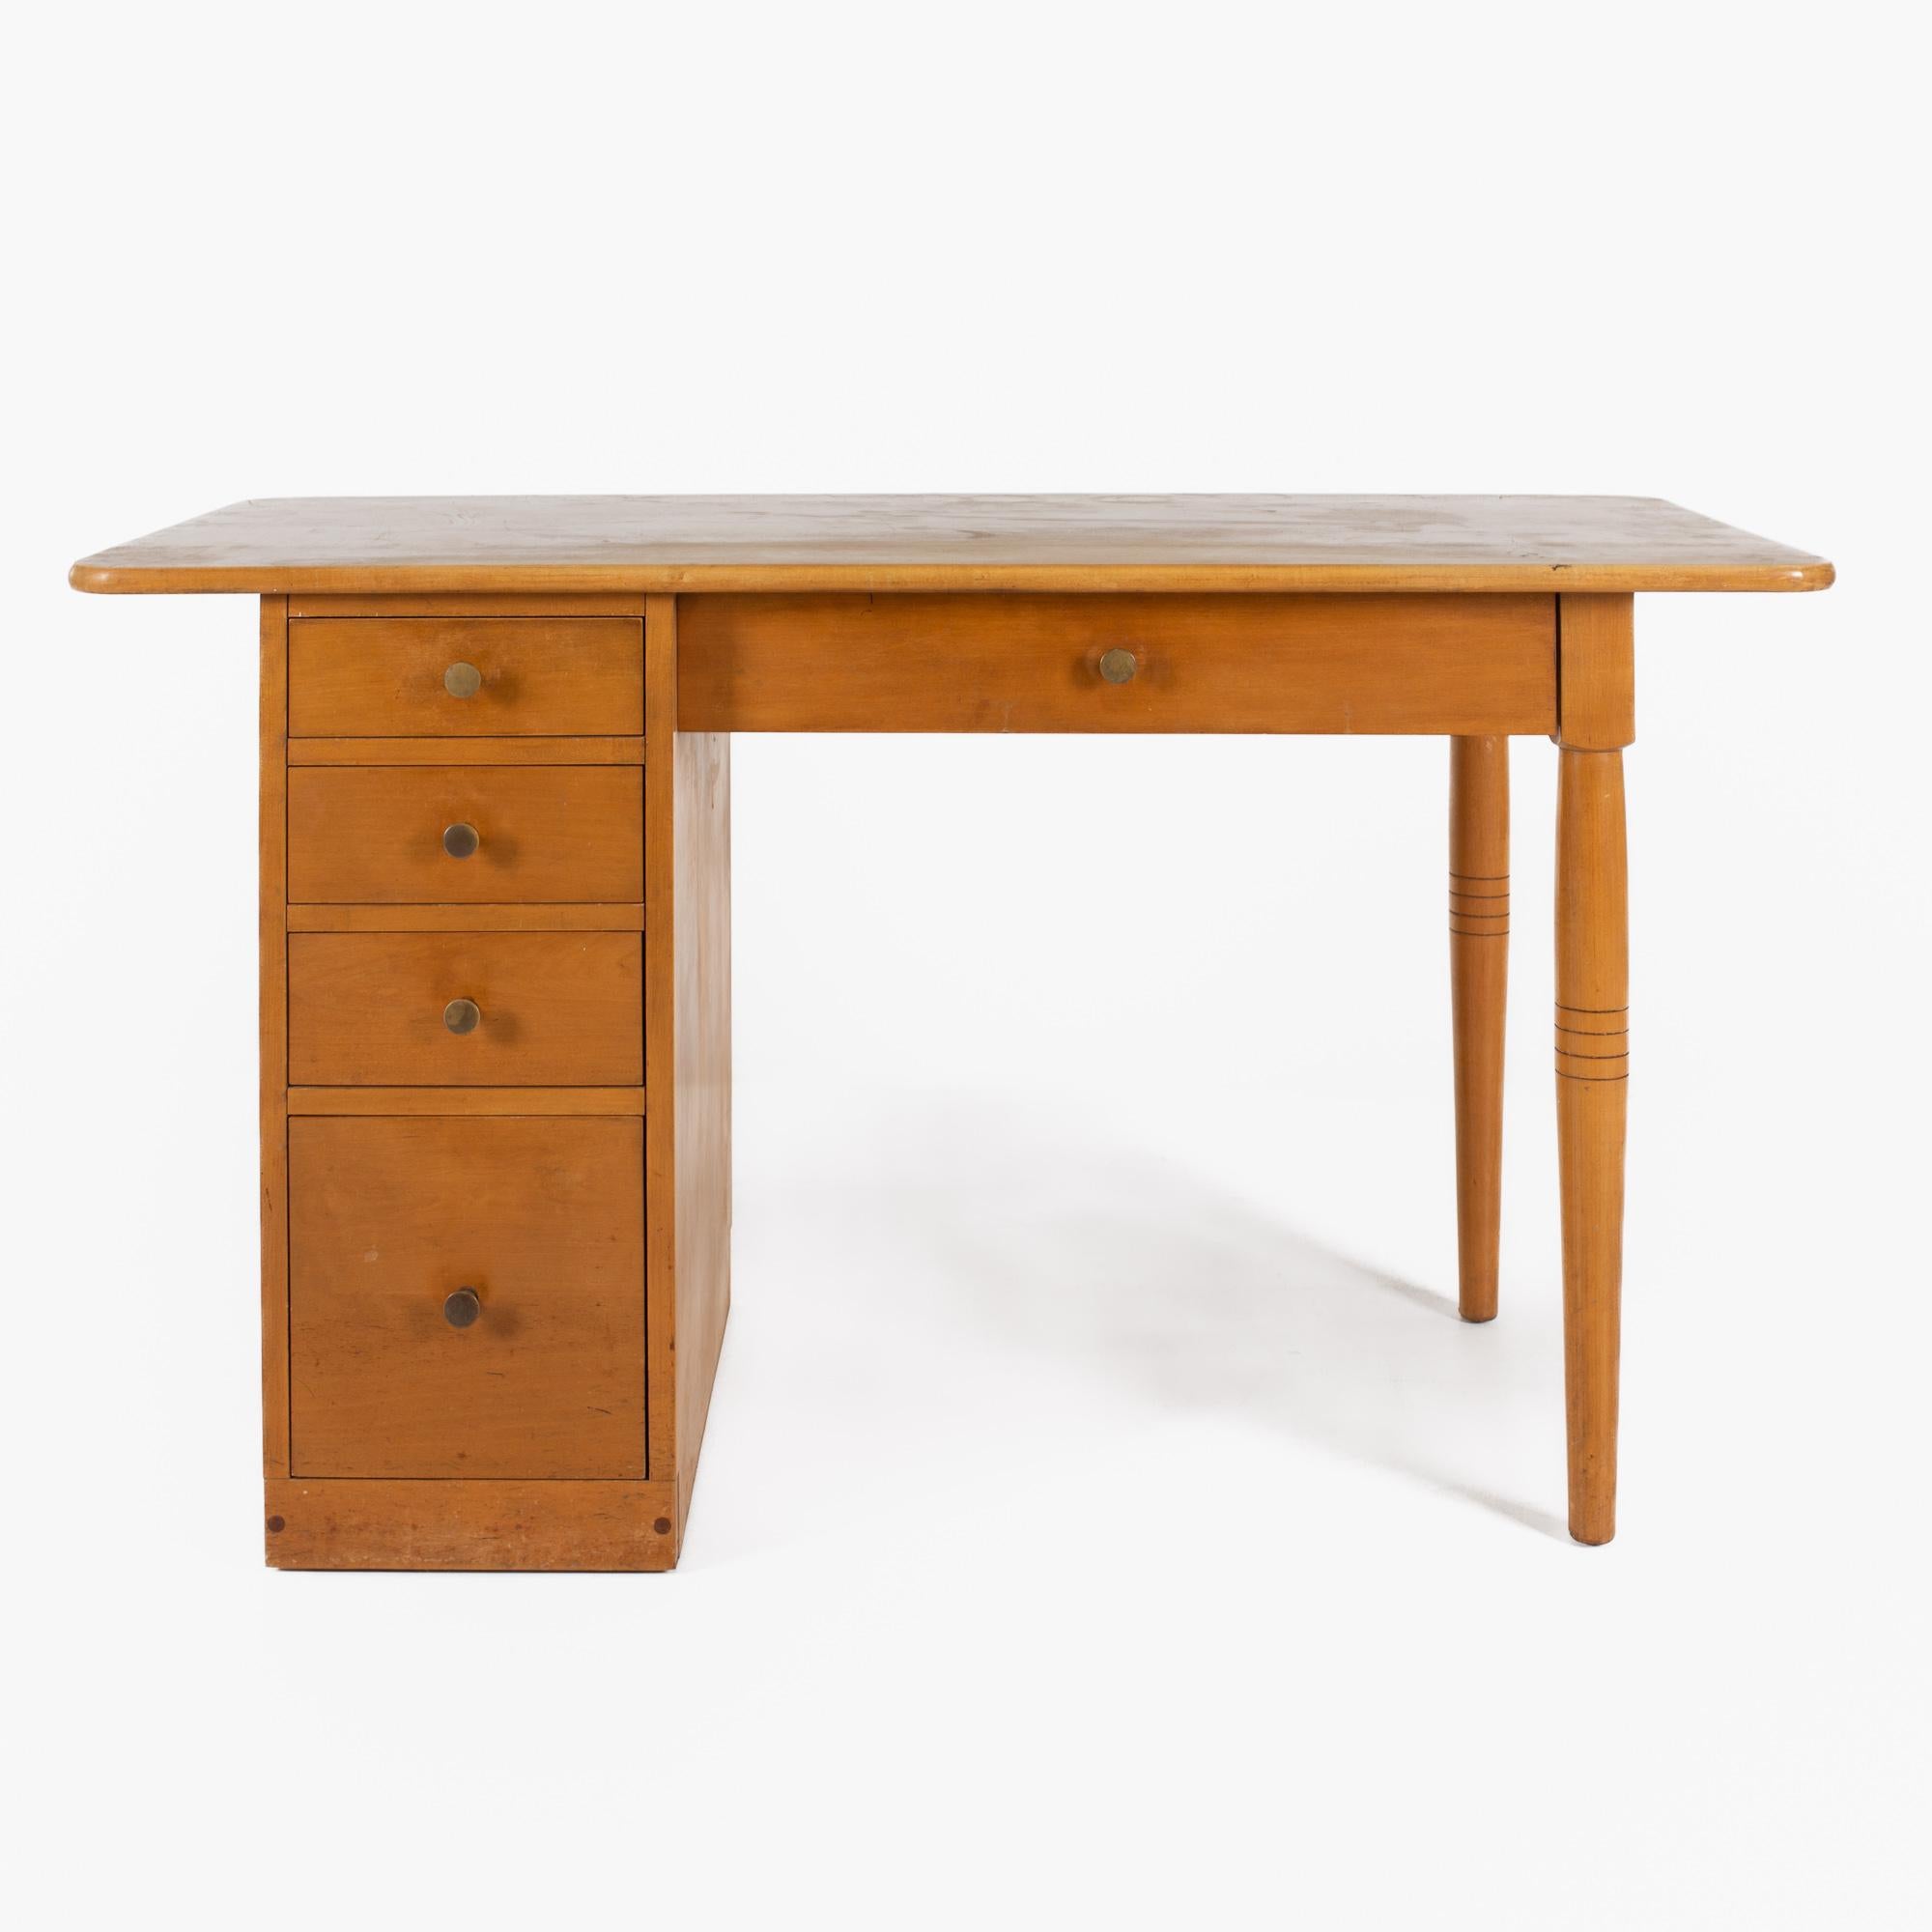 Paul McCobb style mid century whitney birch desk

The desk measures: 52 wide x 25 deep x 30 high, with a chair clearance of 24 inches

All pieces of furniture can be had in what we call restored vintage condition. That means the piece is